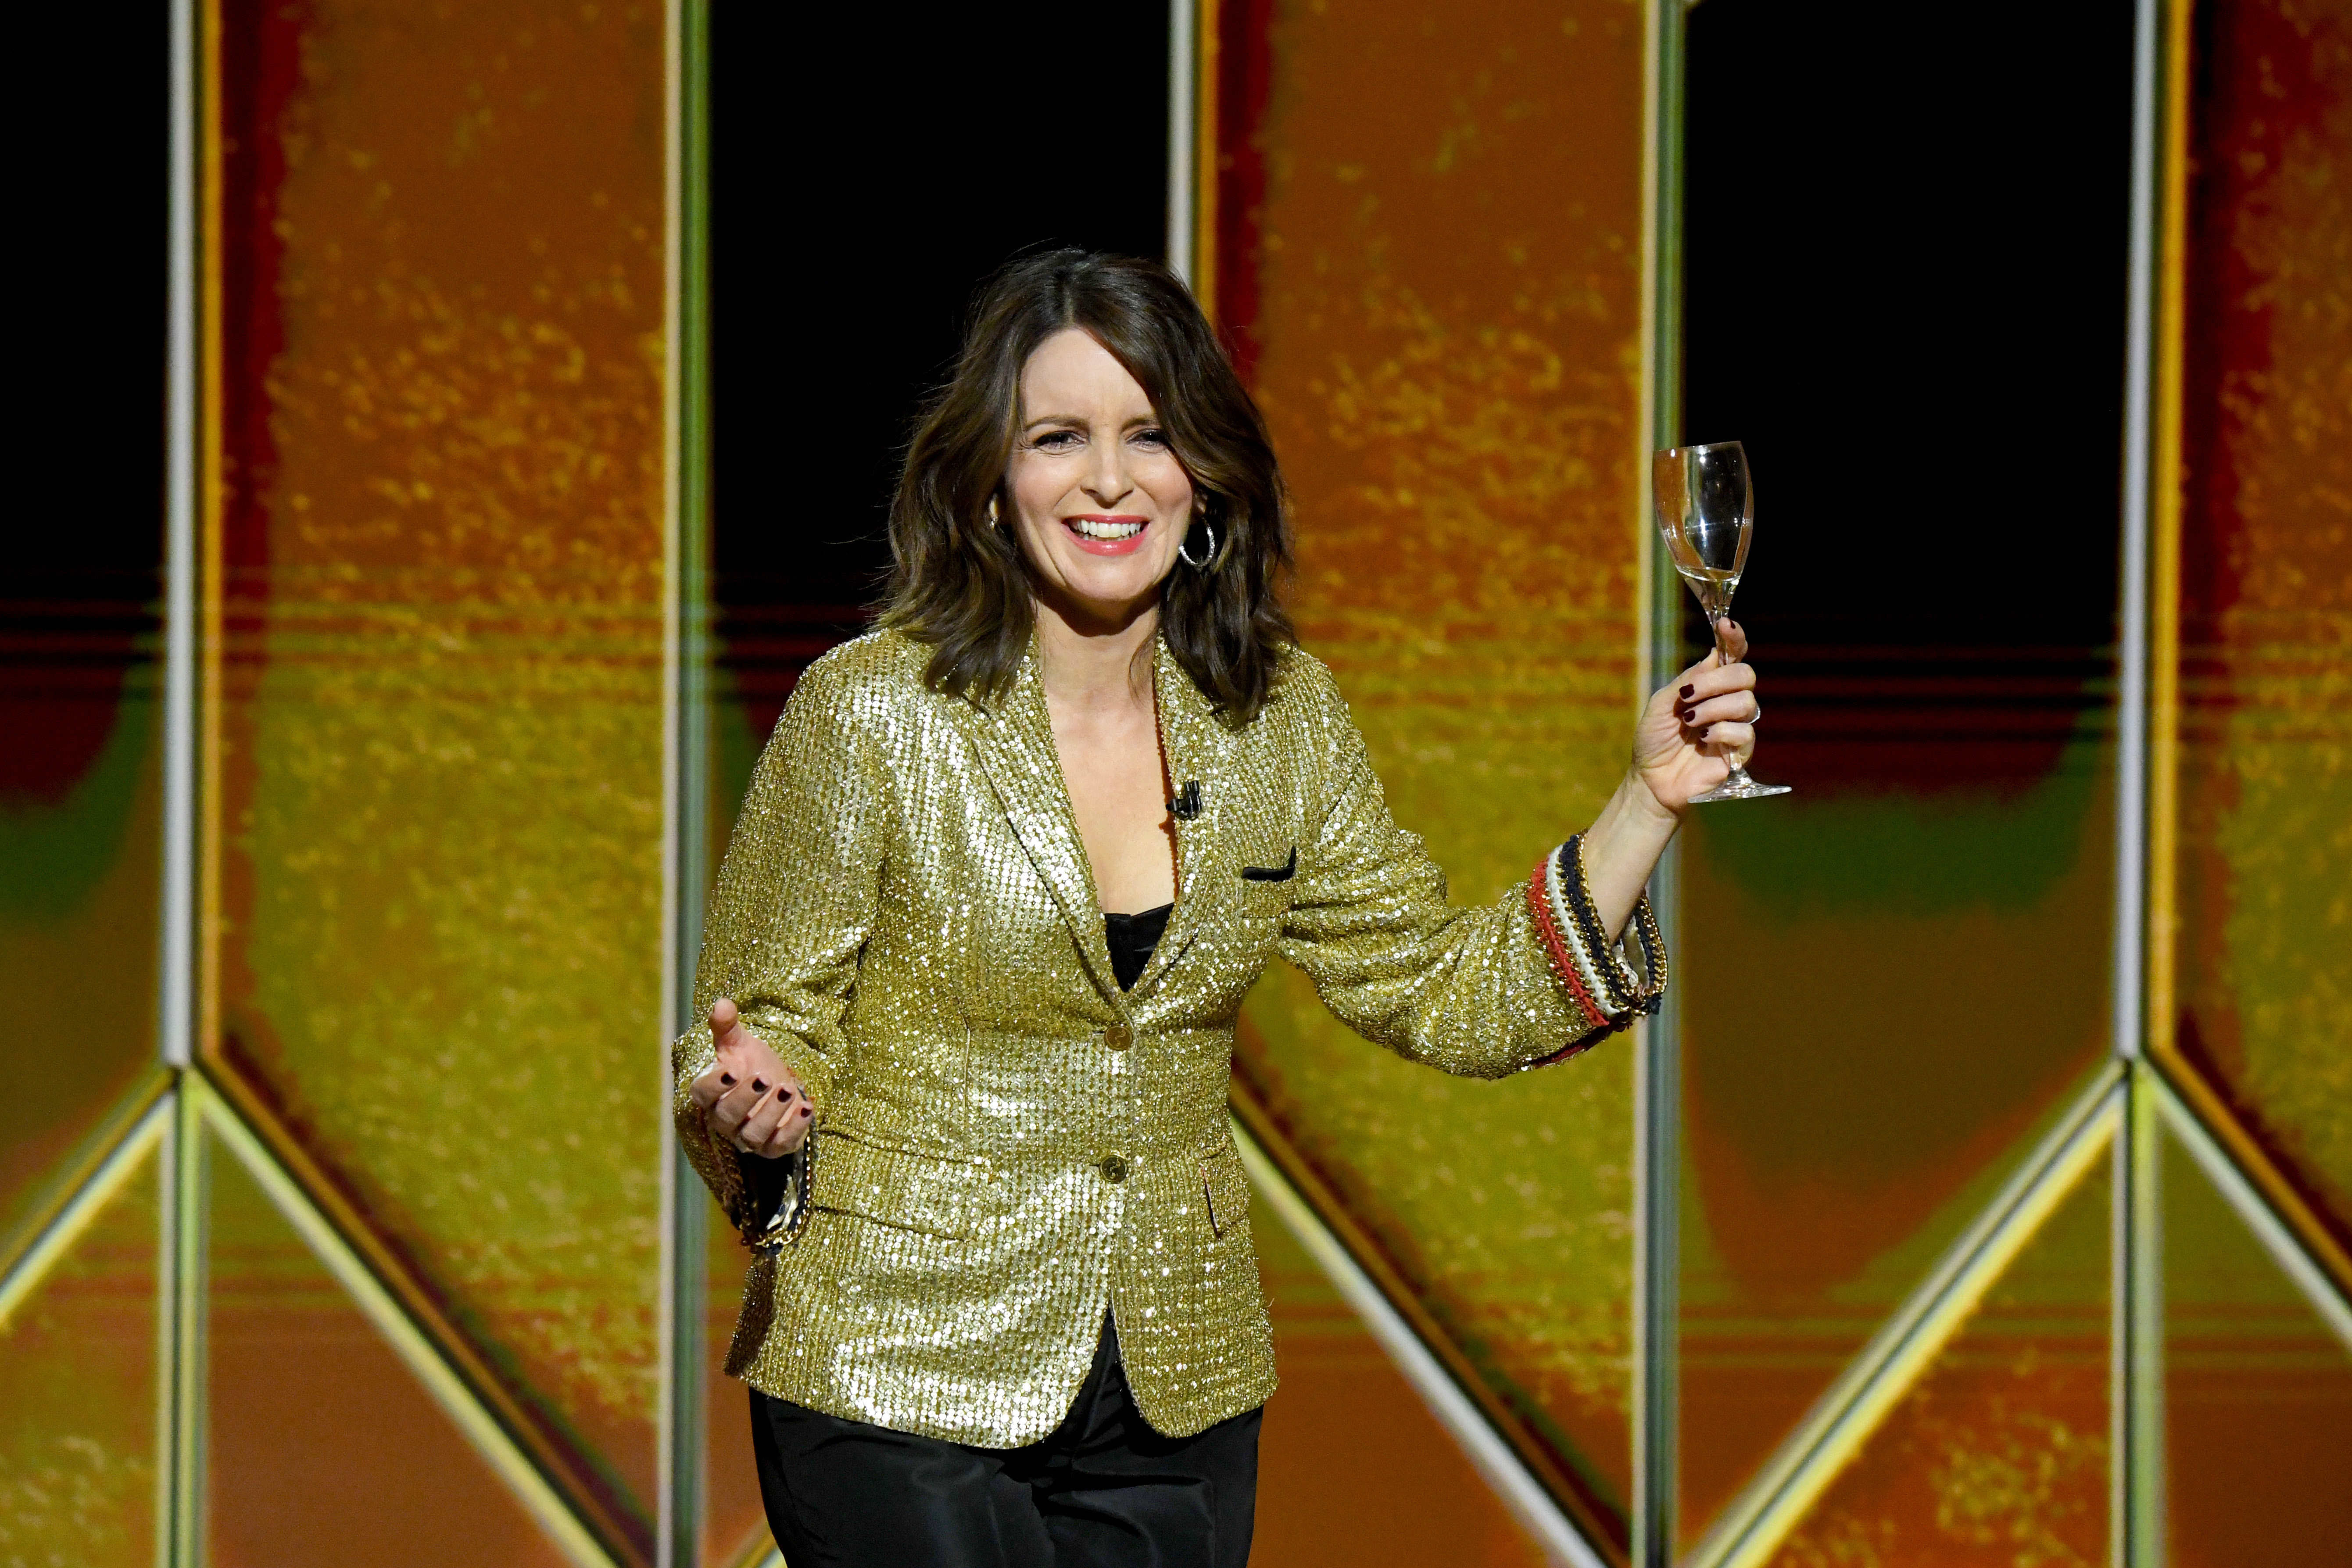 Tina Fey holds up a wineglass onstage at the Golden Globes in 2021.